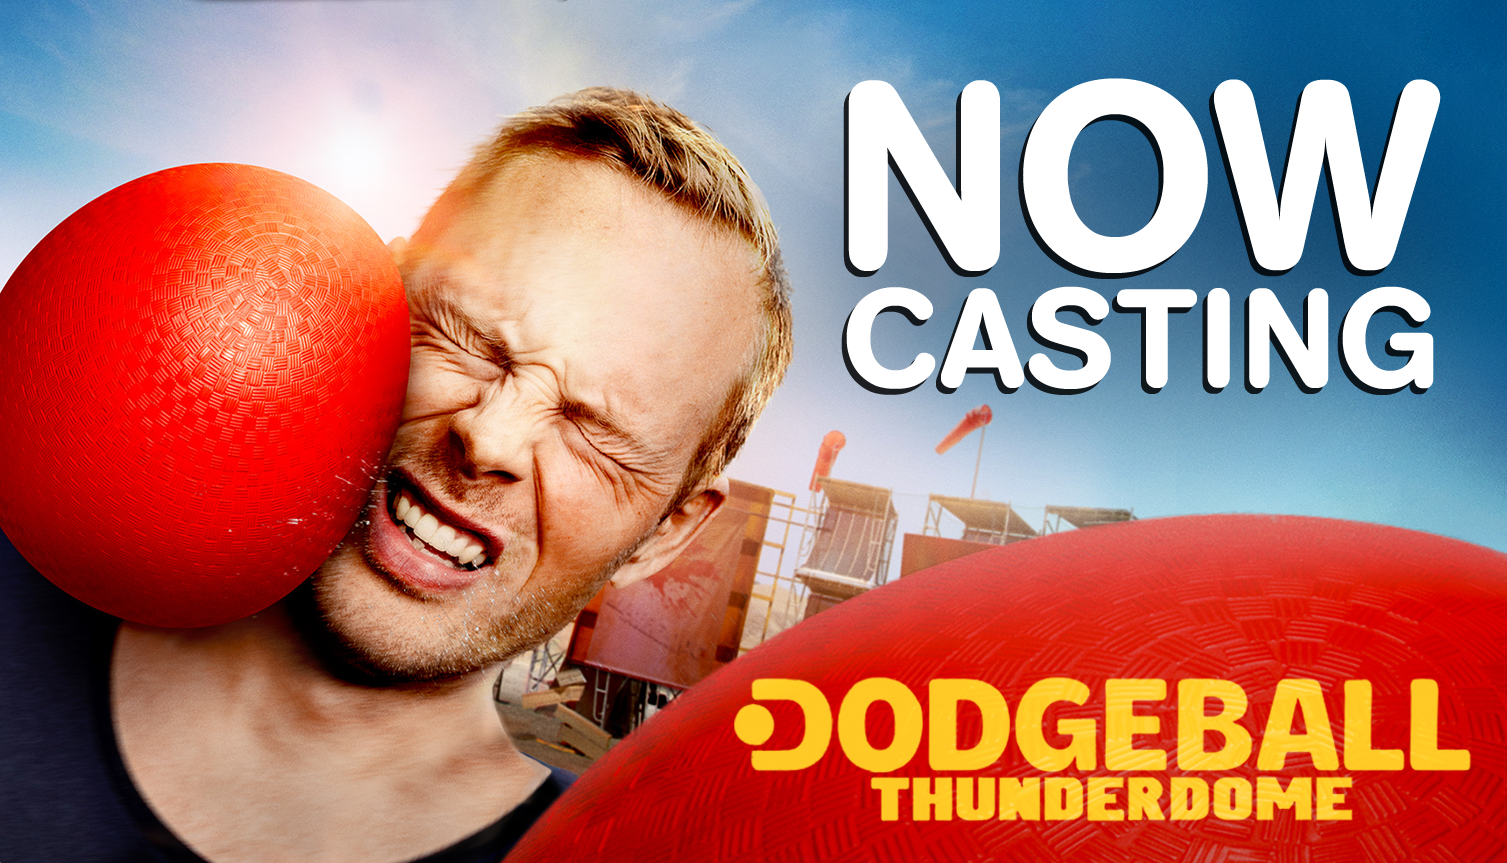 Now Casting Fierce Competitors For Discovery Channel’s “Dodgeball Thunderdome”!